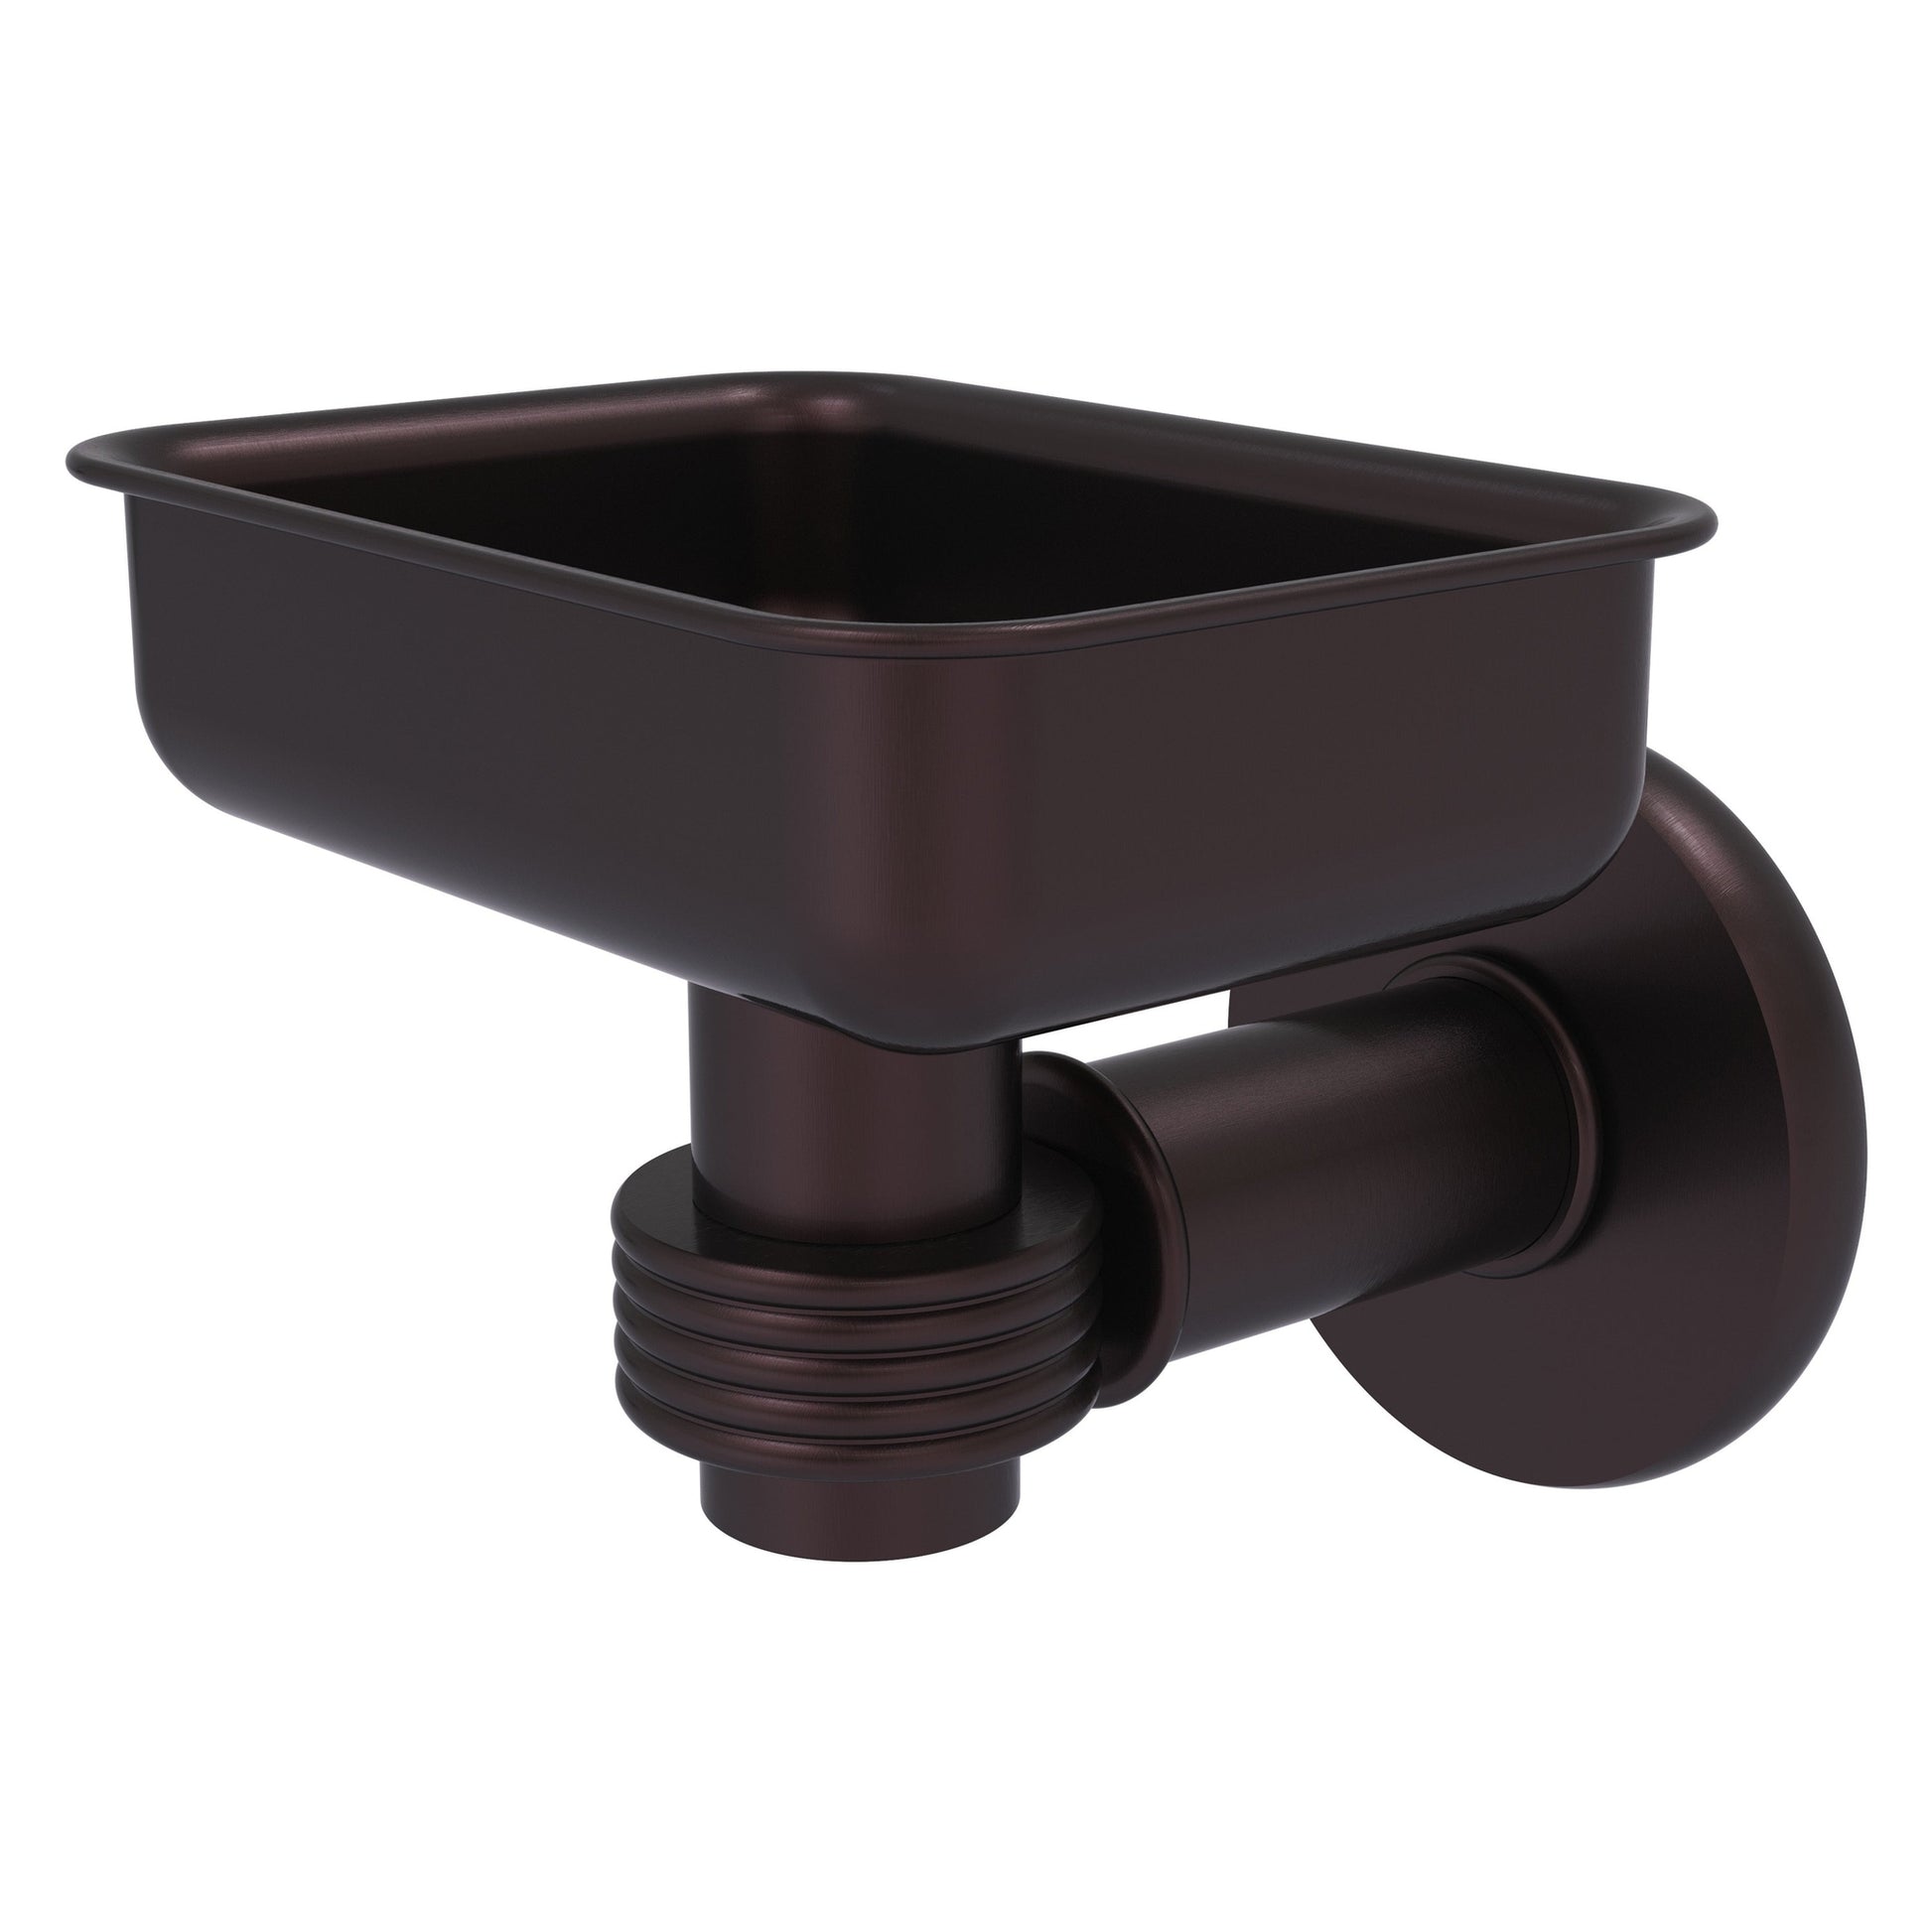 Allied Brass Continental 4.5" x 3.5" Antique Bronze Solid Brass Wall-Mounted Soap Dish Holder with Grooved Accents